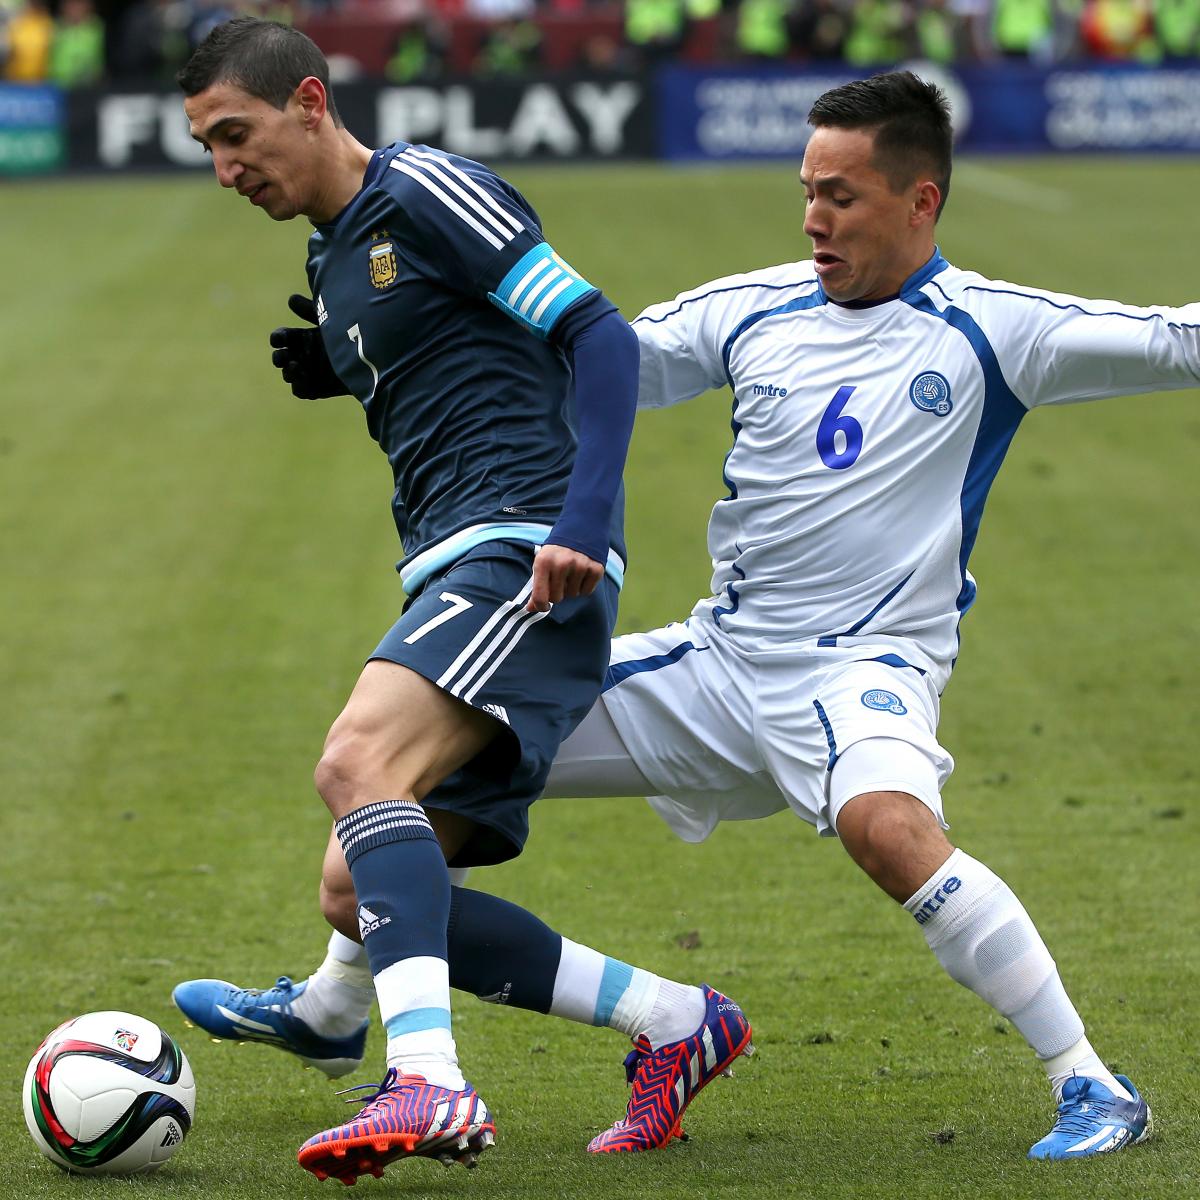 El Salvador vs. Argentina Winners and Losers from International